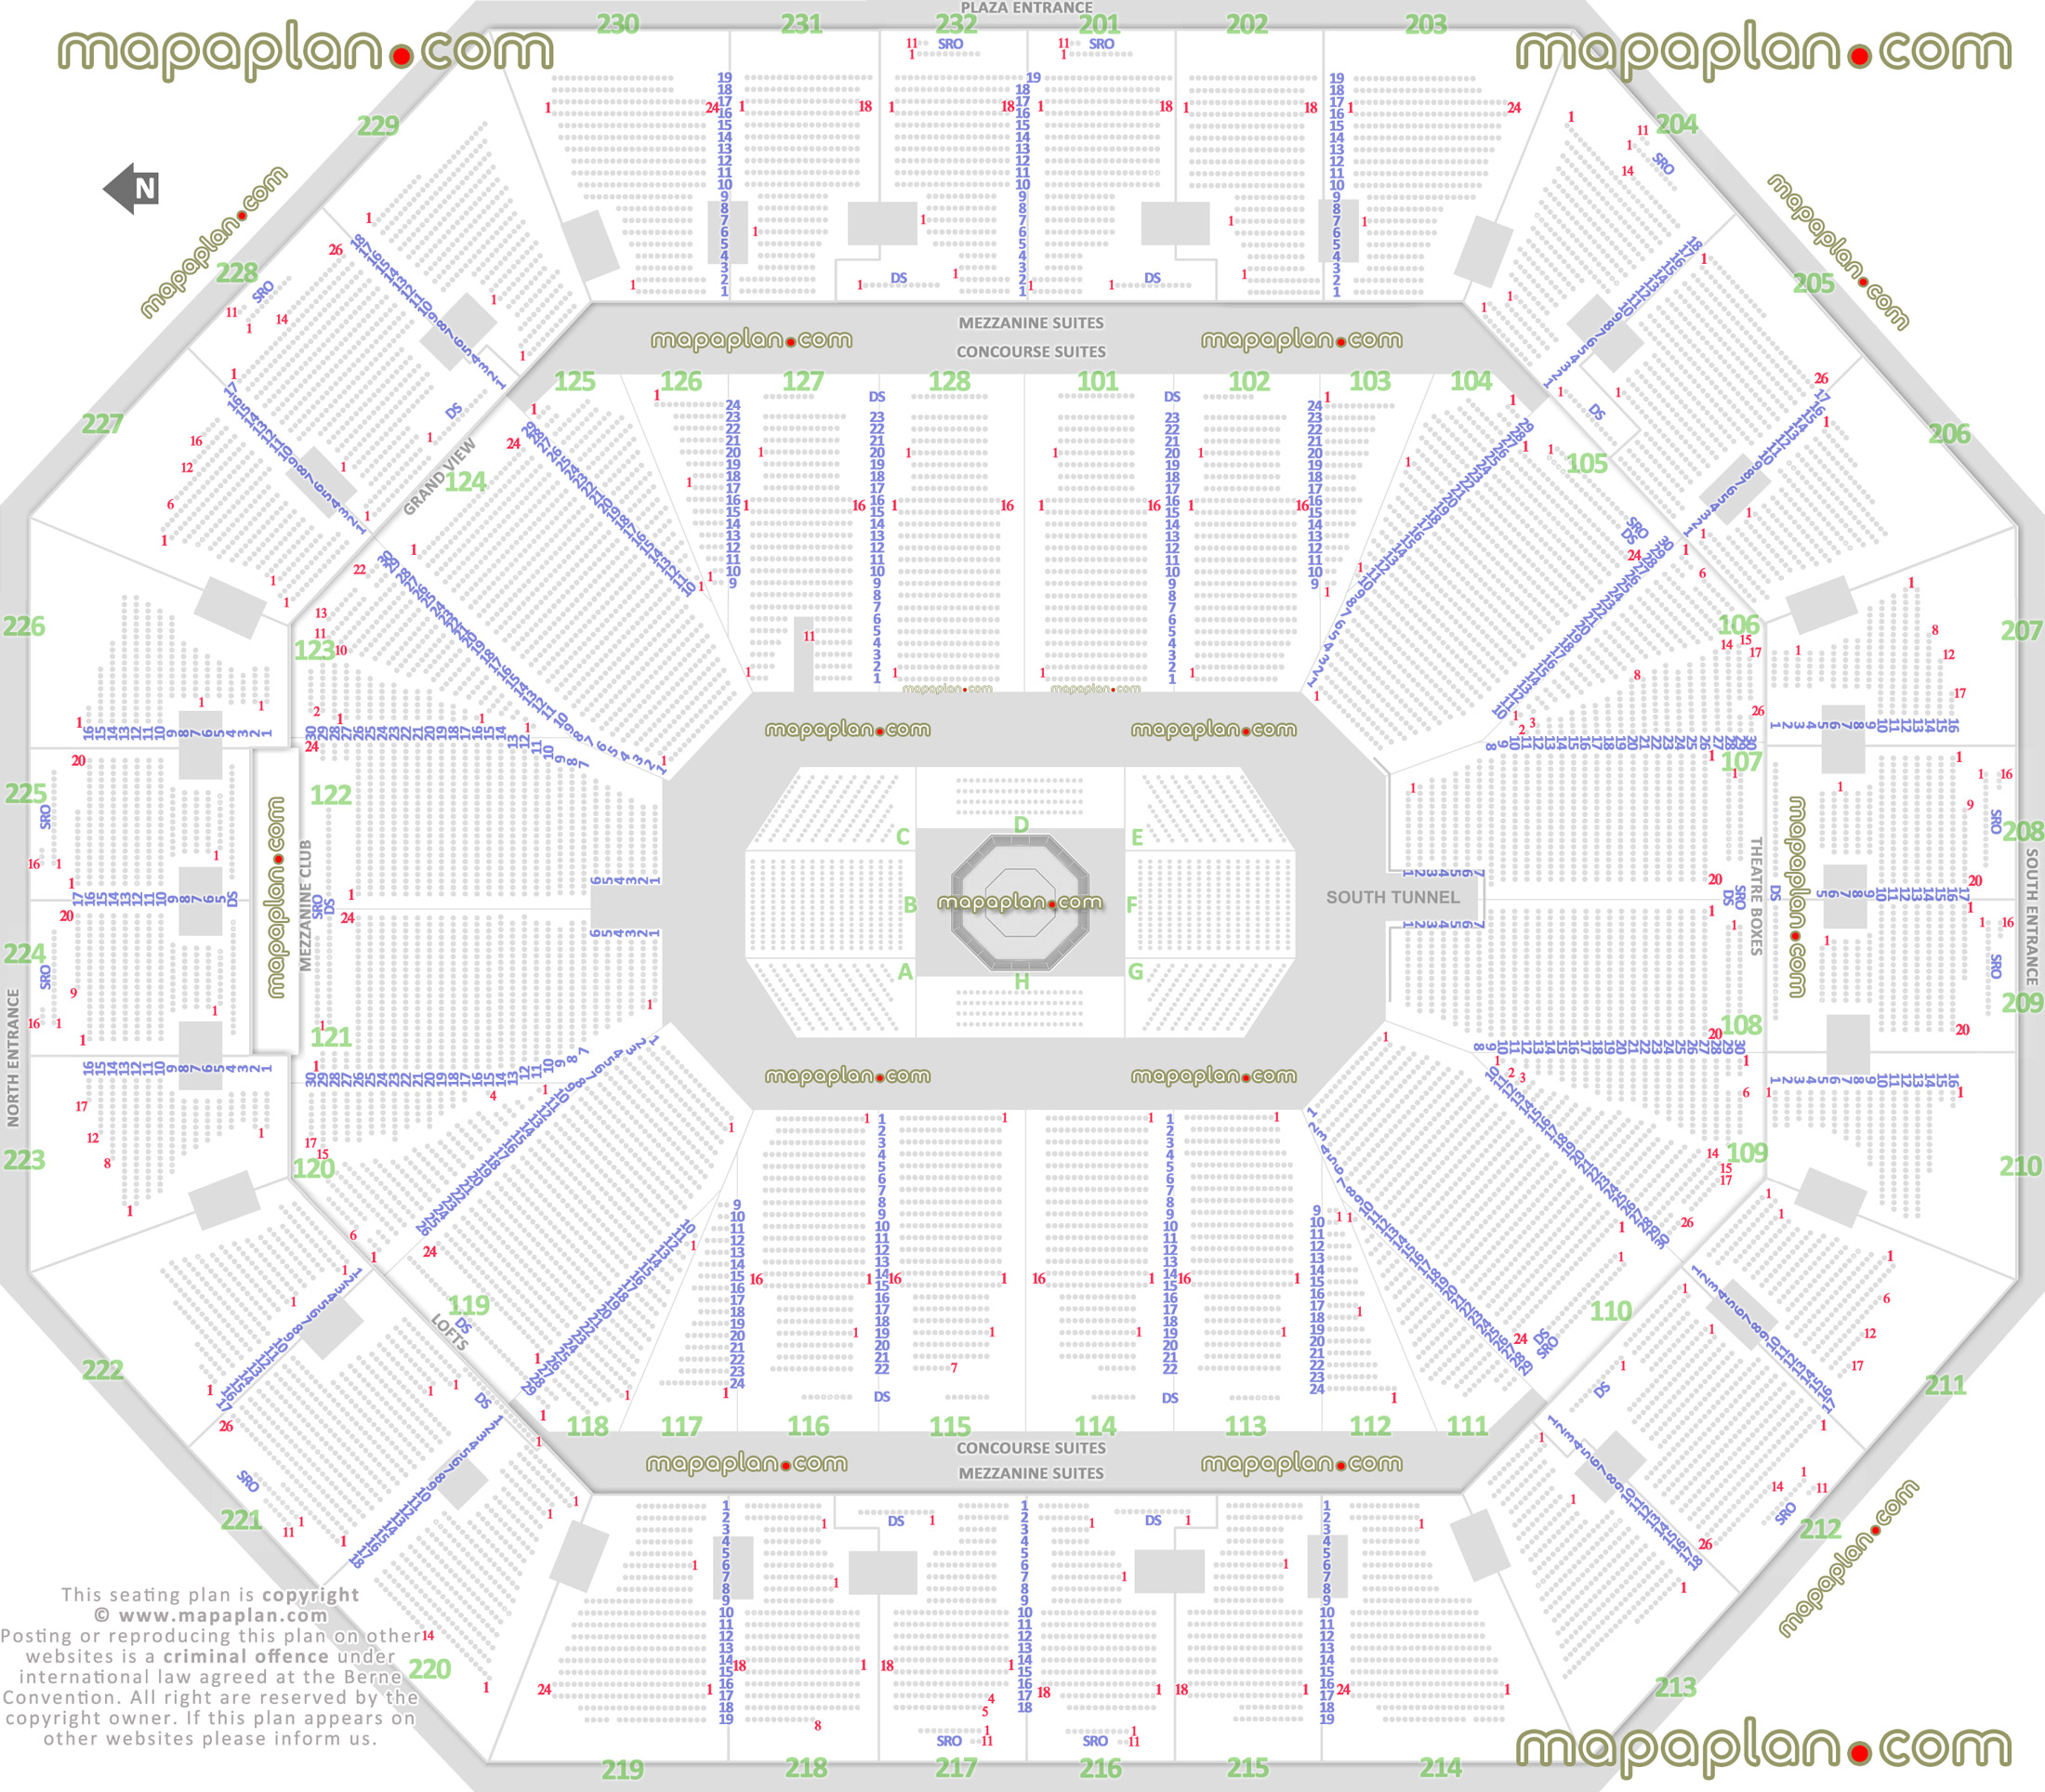 ufc mma fights oakland ca united states detailed seating capacity arrangement arena row numbers layout plaza south north entrance virtual interactive image map how many seats per row executive hospitality rental luxury party sky lofts zone Oakland Oracle Arena seating chart